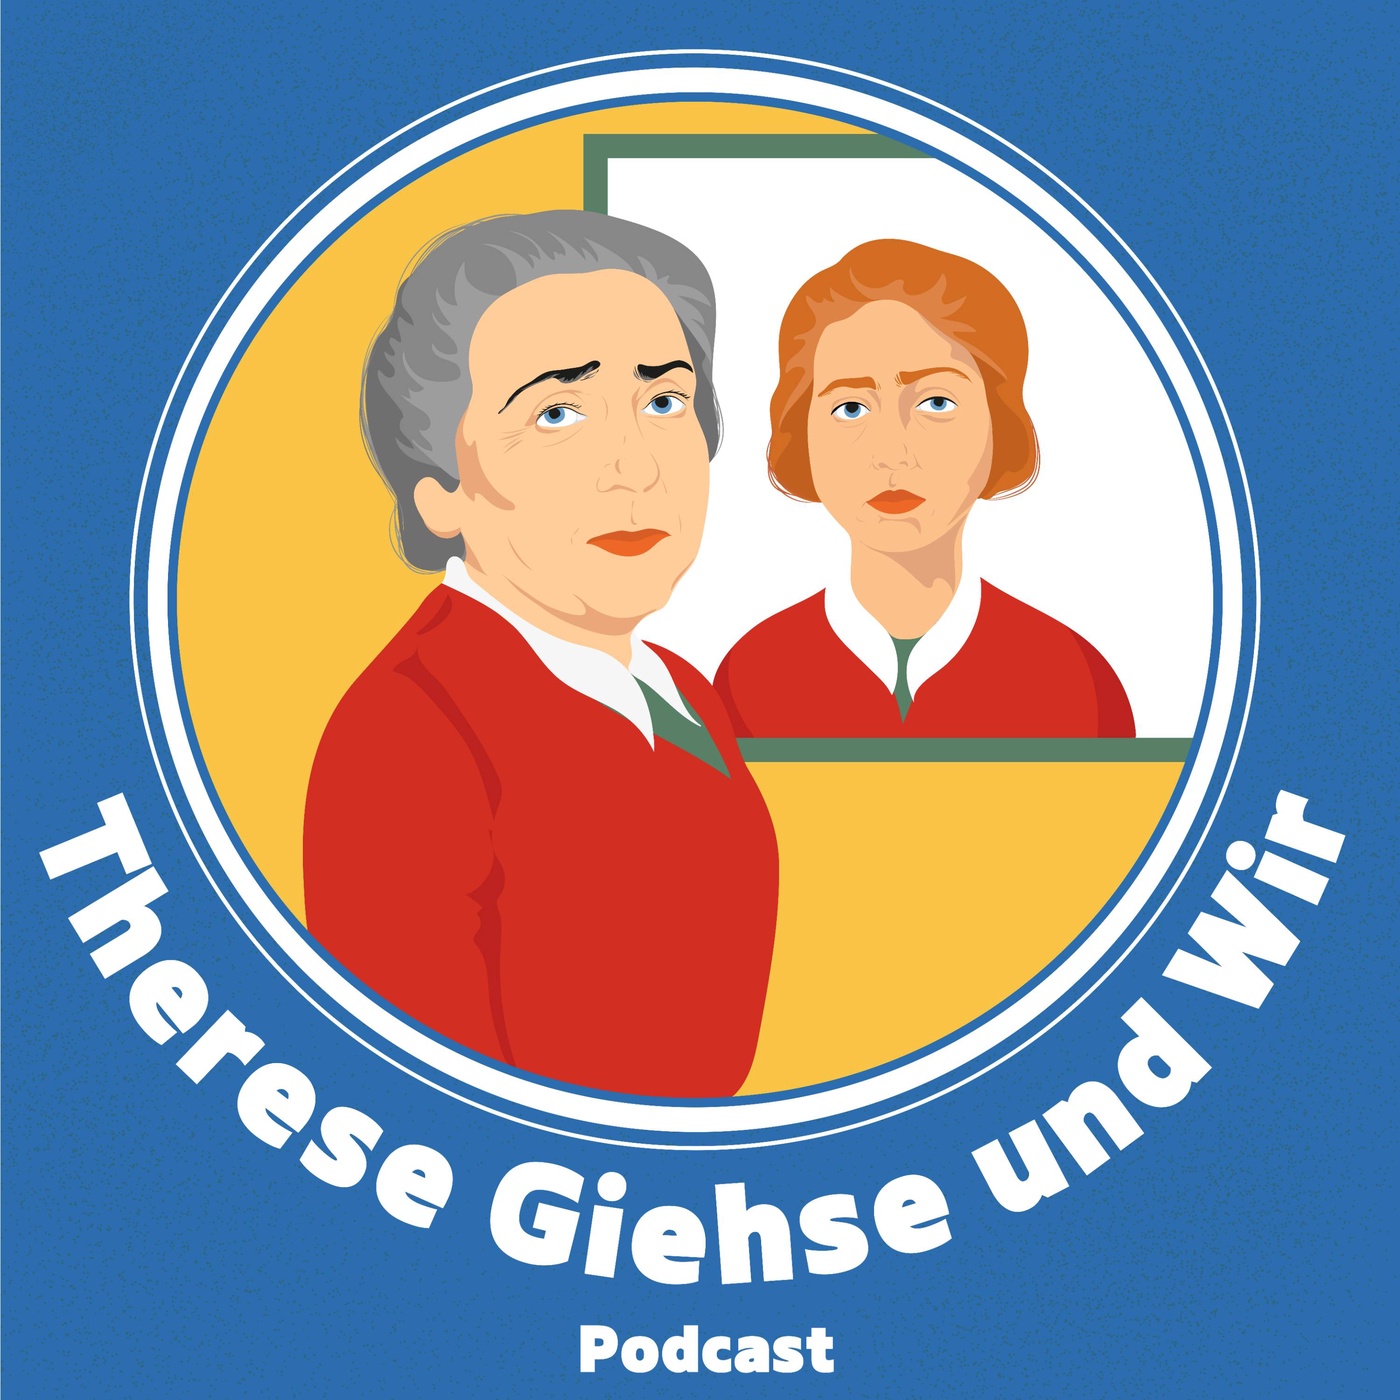 Therese Giehse und Wir